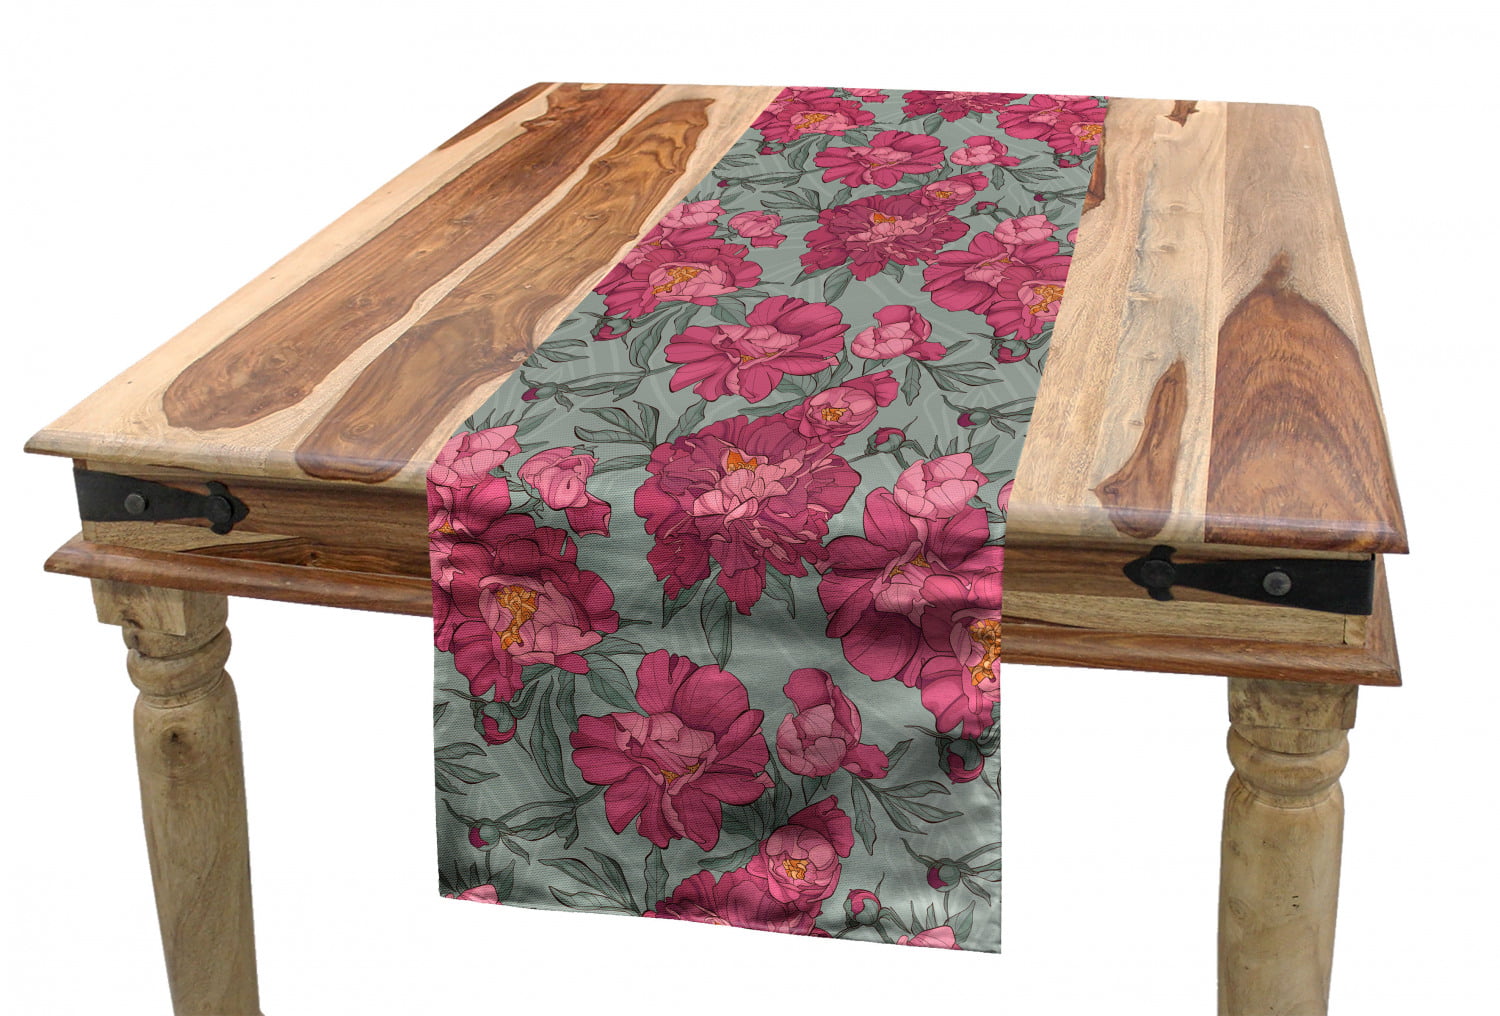 Pale Green Dried Rose 16 X 72 Blossoming Flower with Foliage Ornate Springtime Season Peonies Ambesonne Flower Table Runner Dining Room Kitchen Rectangular Runner